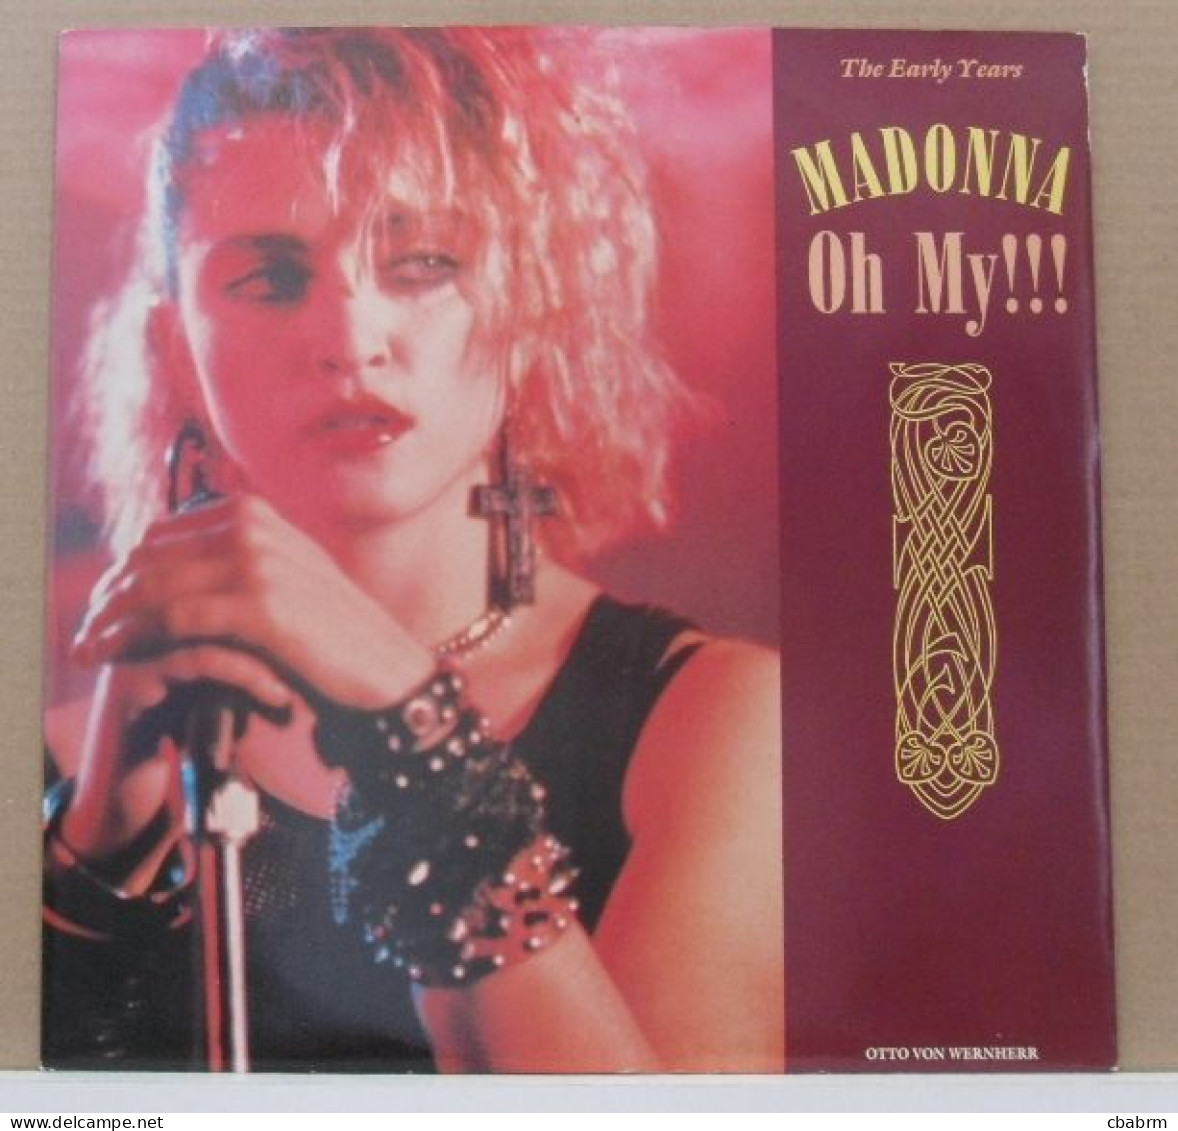 MAXI 45 TOURS MADONNA OH MY !!! - MADE IN UK REPLAY 3009 - 45 G - Maxi-Single